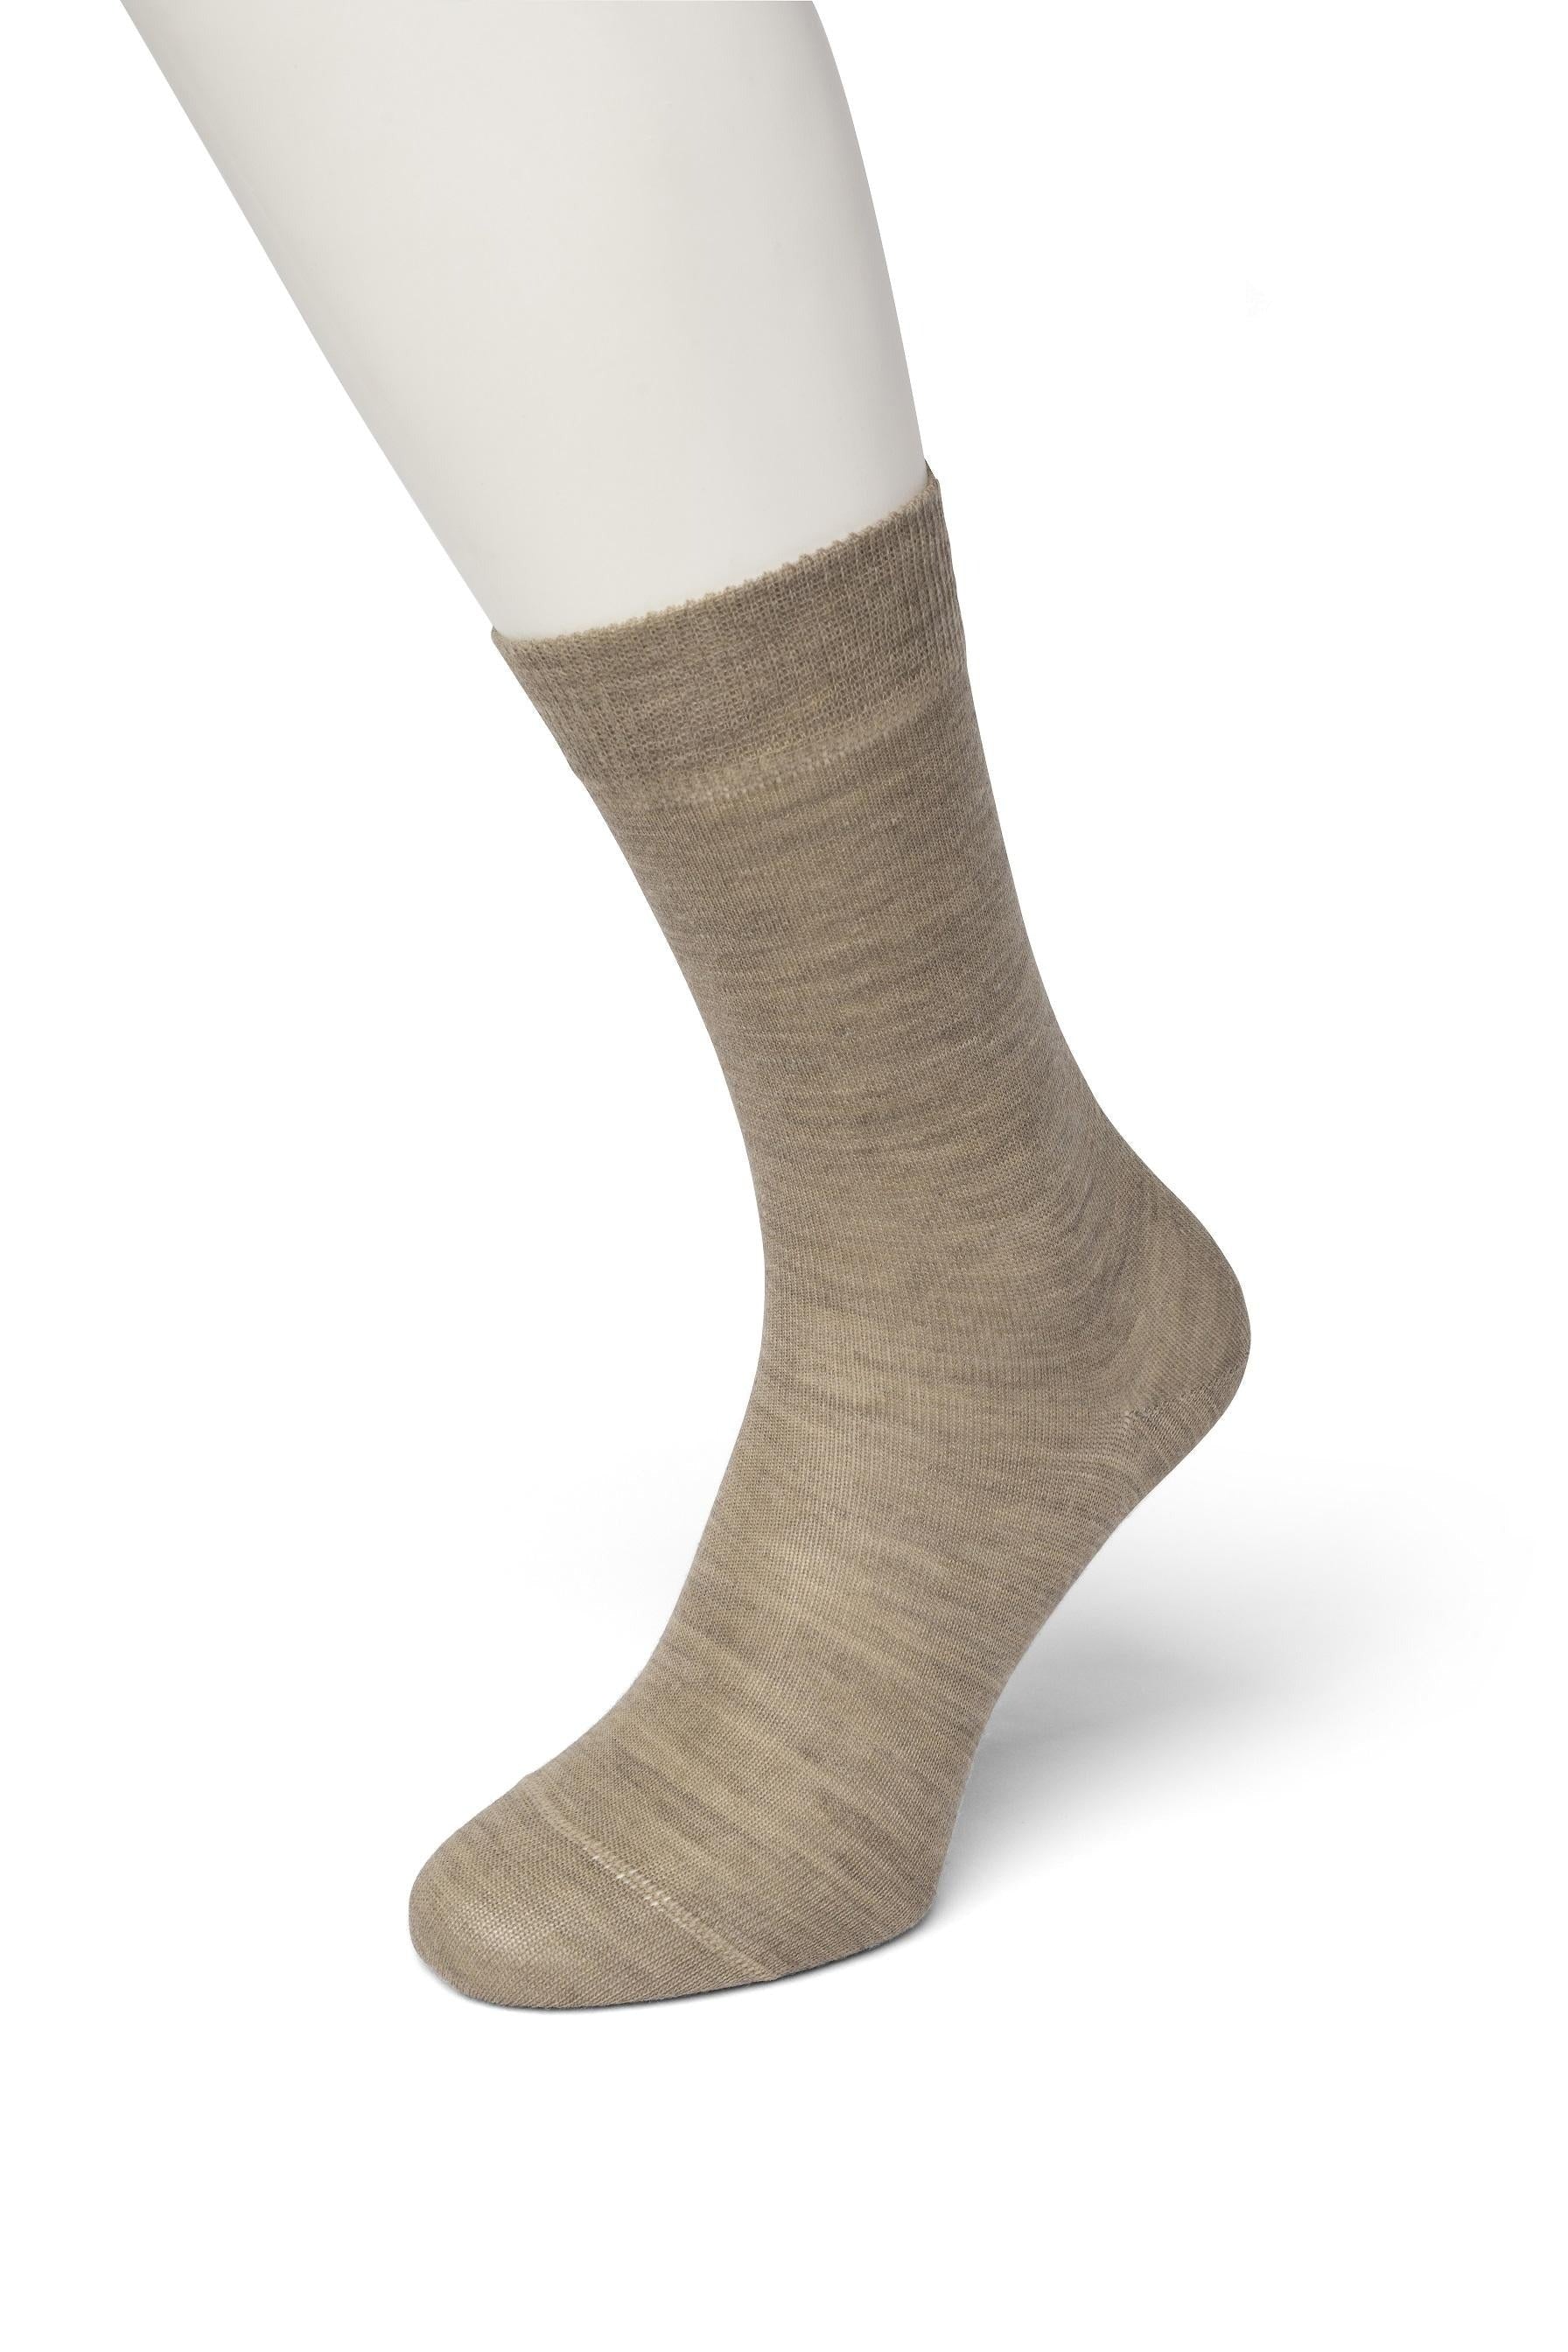 Bonnie Doon Wool/Cotton Sock BD631402 - beige (taupe heather) warm thermal ankle socks perfect for the cold Winter weather